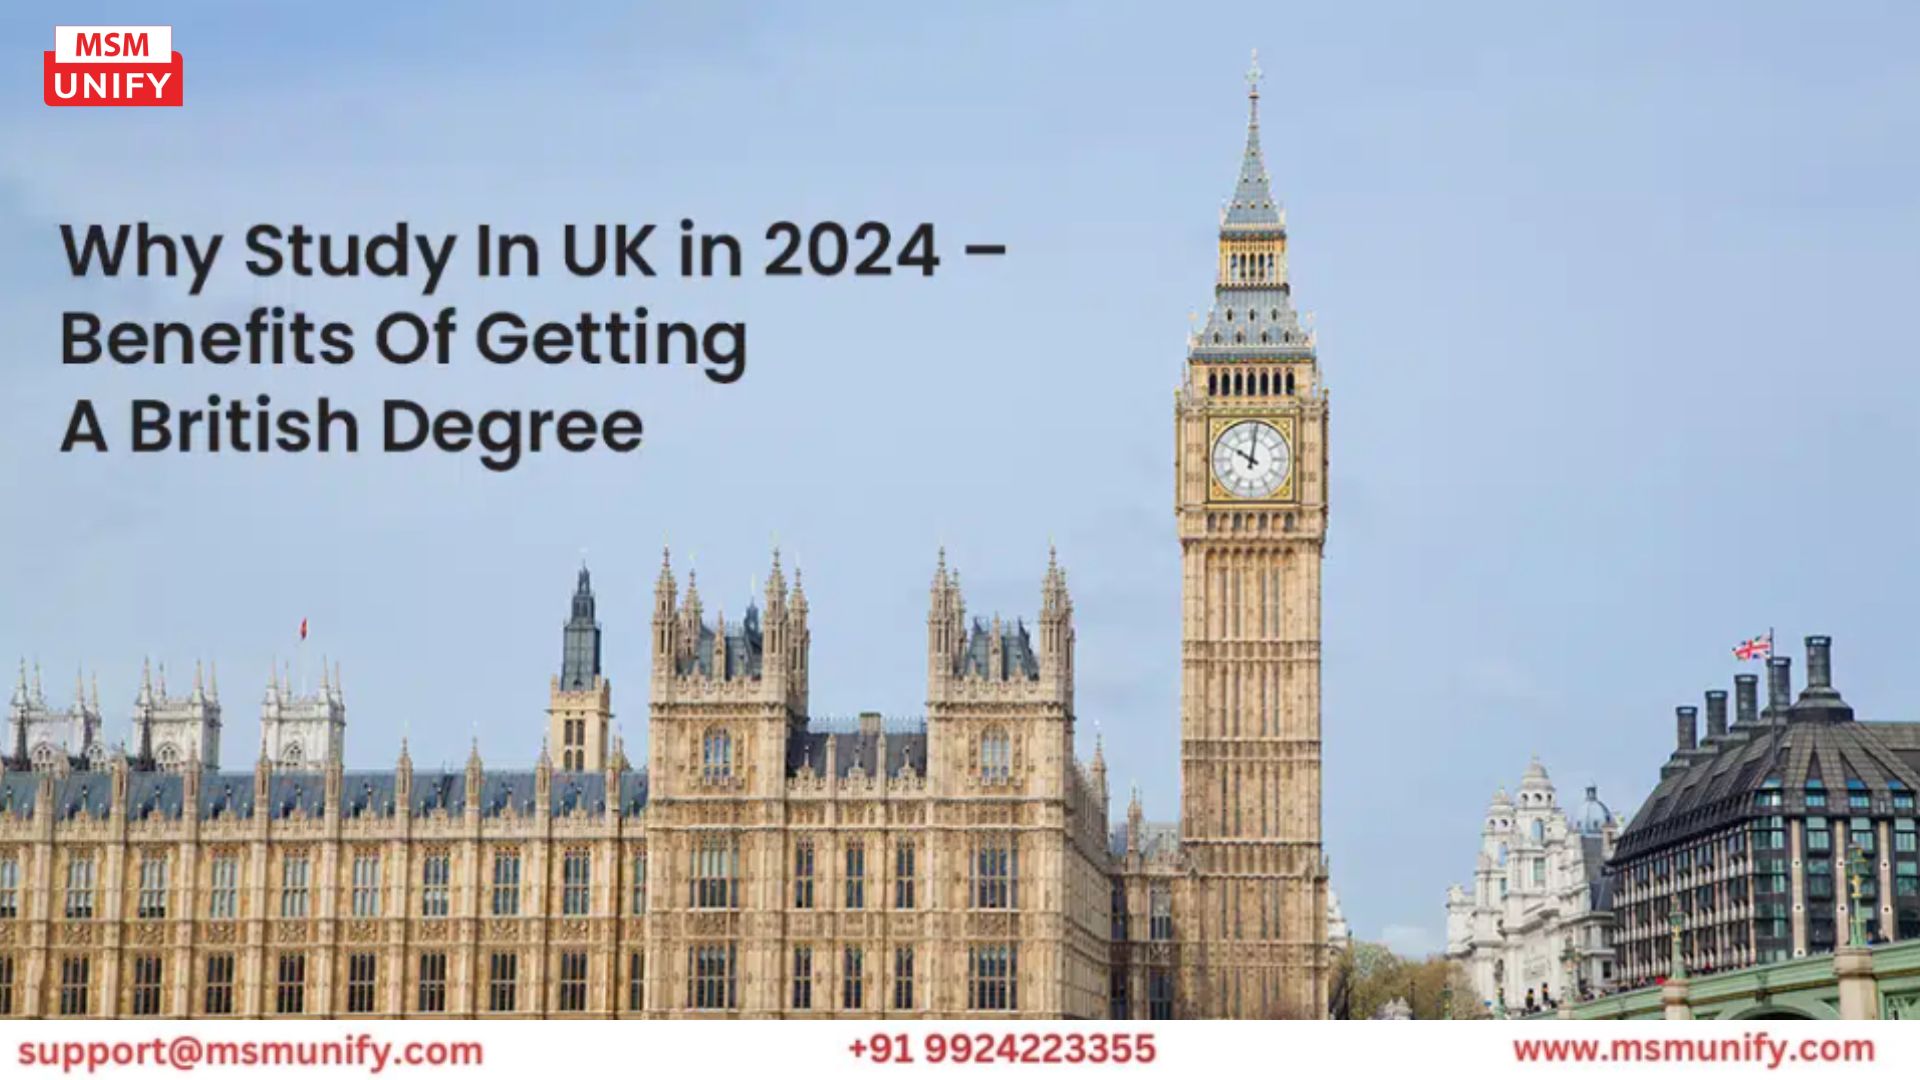 Dive into a world of academic excellence and cultural marvels. Uncover the <a href="https://www.msmunify.com/blogs/benefits-of-studying-in-uk/"> Benefits of Studying in the UK</a> that brings a world-class education, cultural diversity, and a gateway to endless opportunities for personal and professional growth. Explore, learn, and thrive. 

